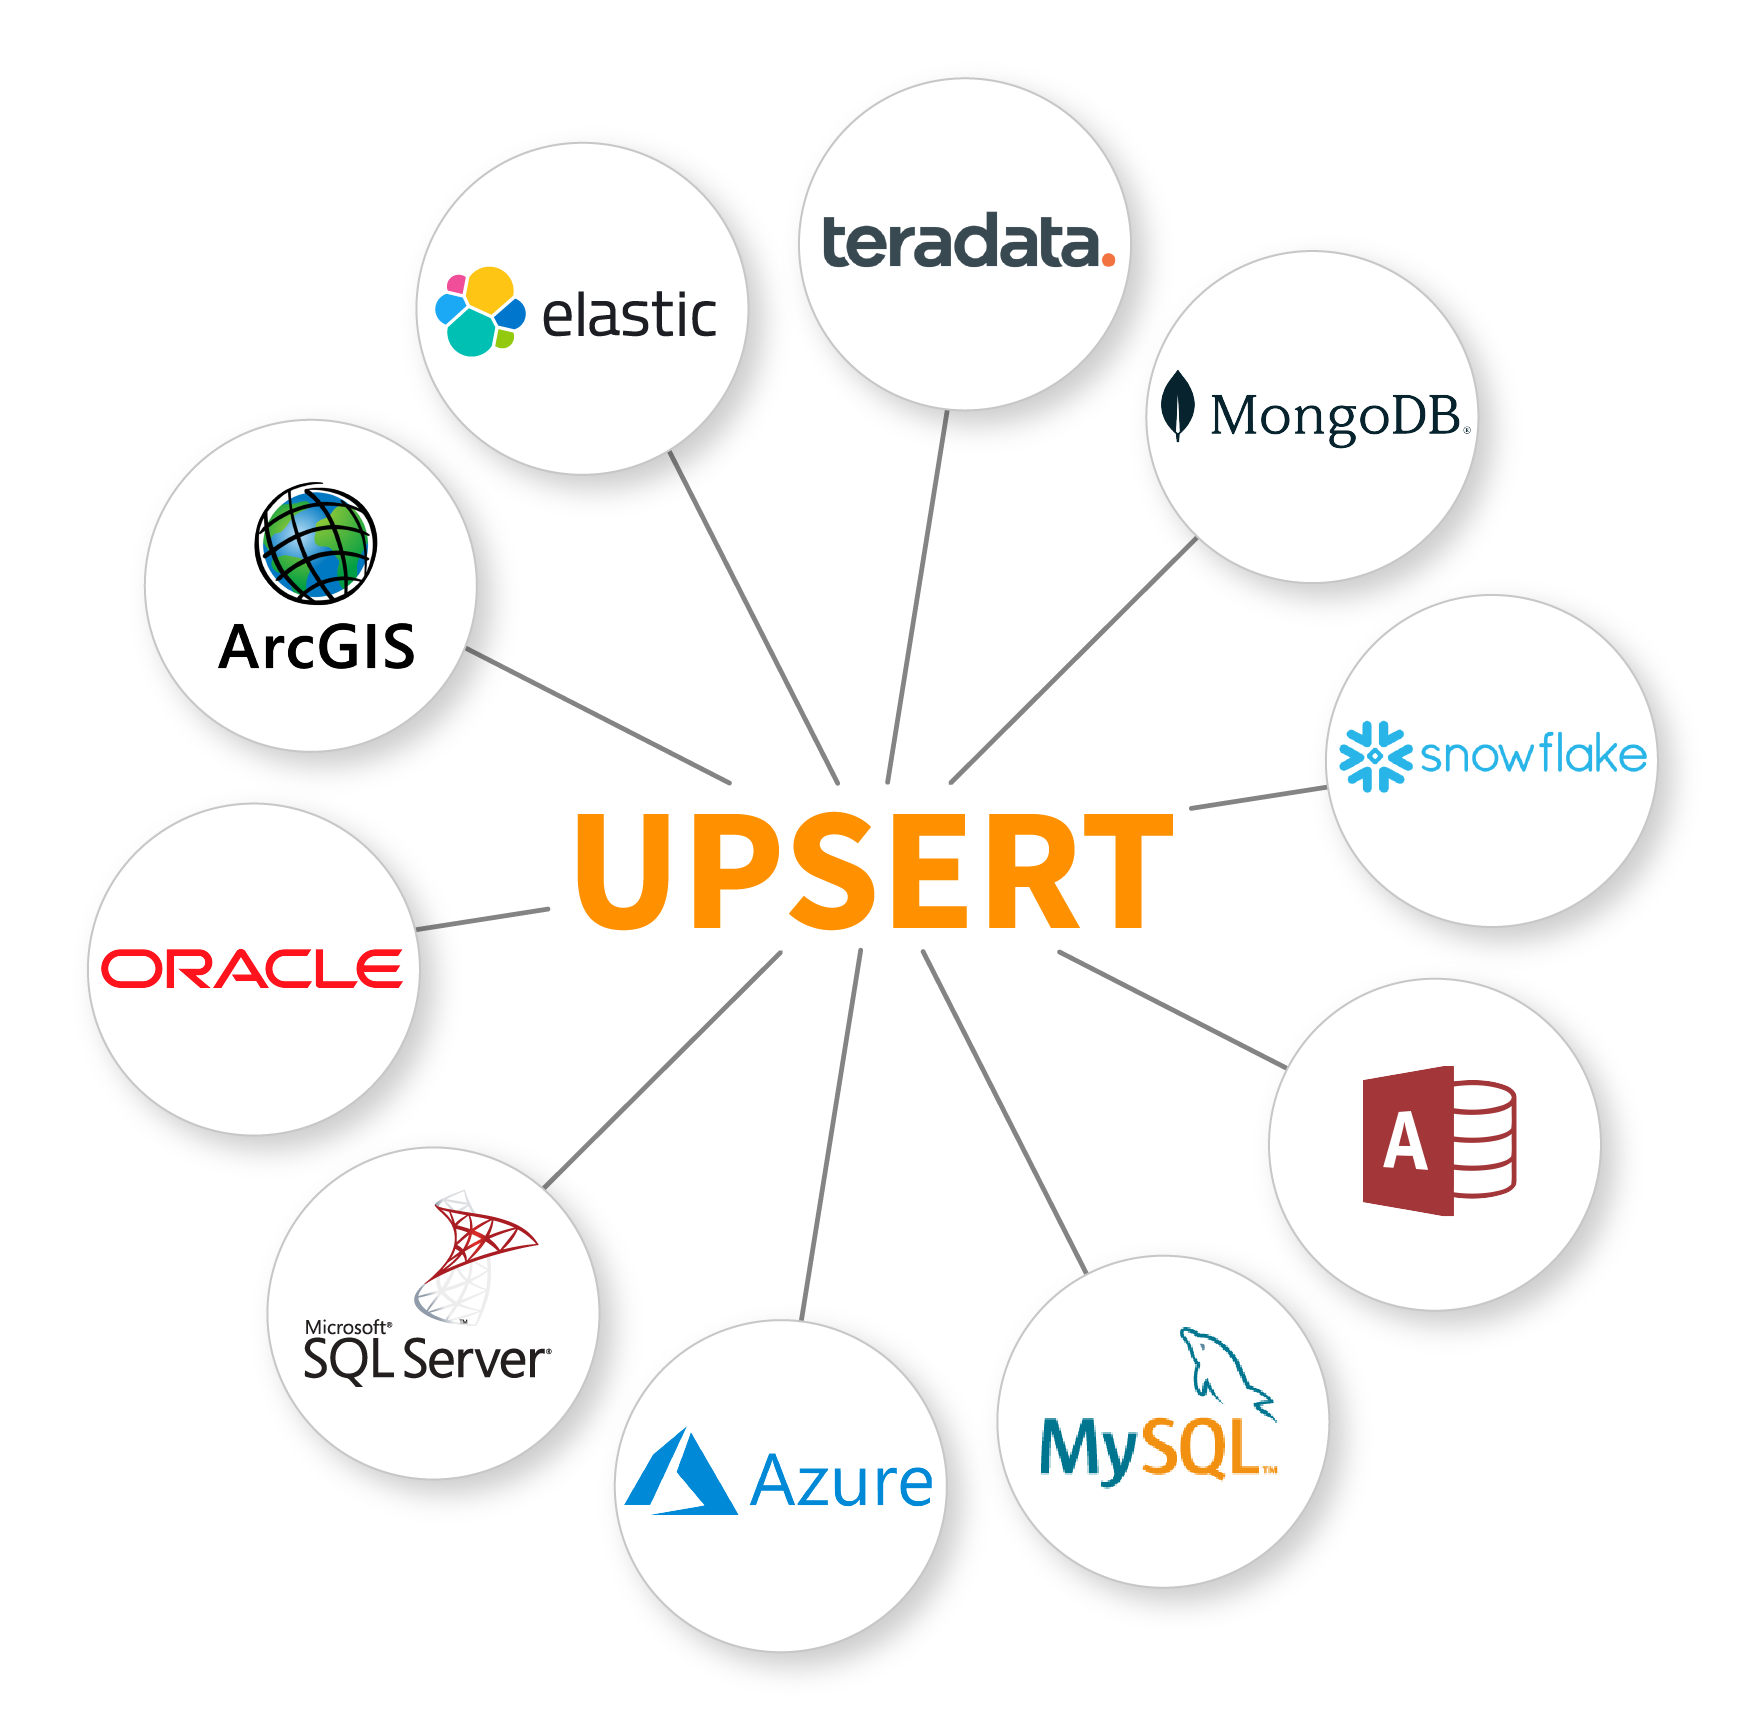 Diagram with the word 'UPSERT' at its center and different databases connected via radial spokes.